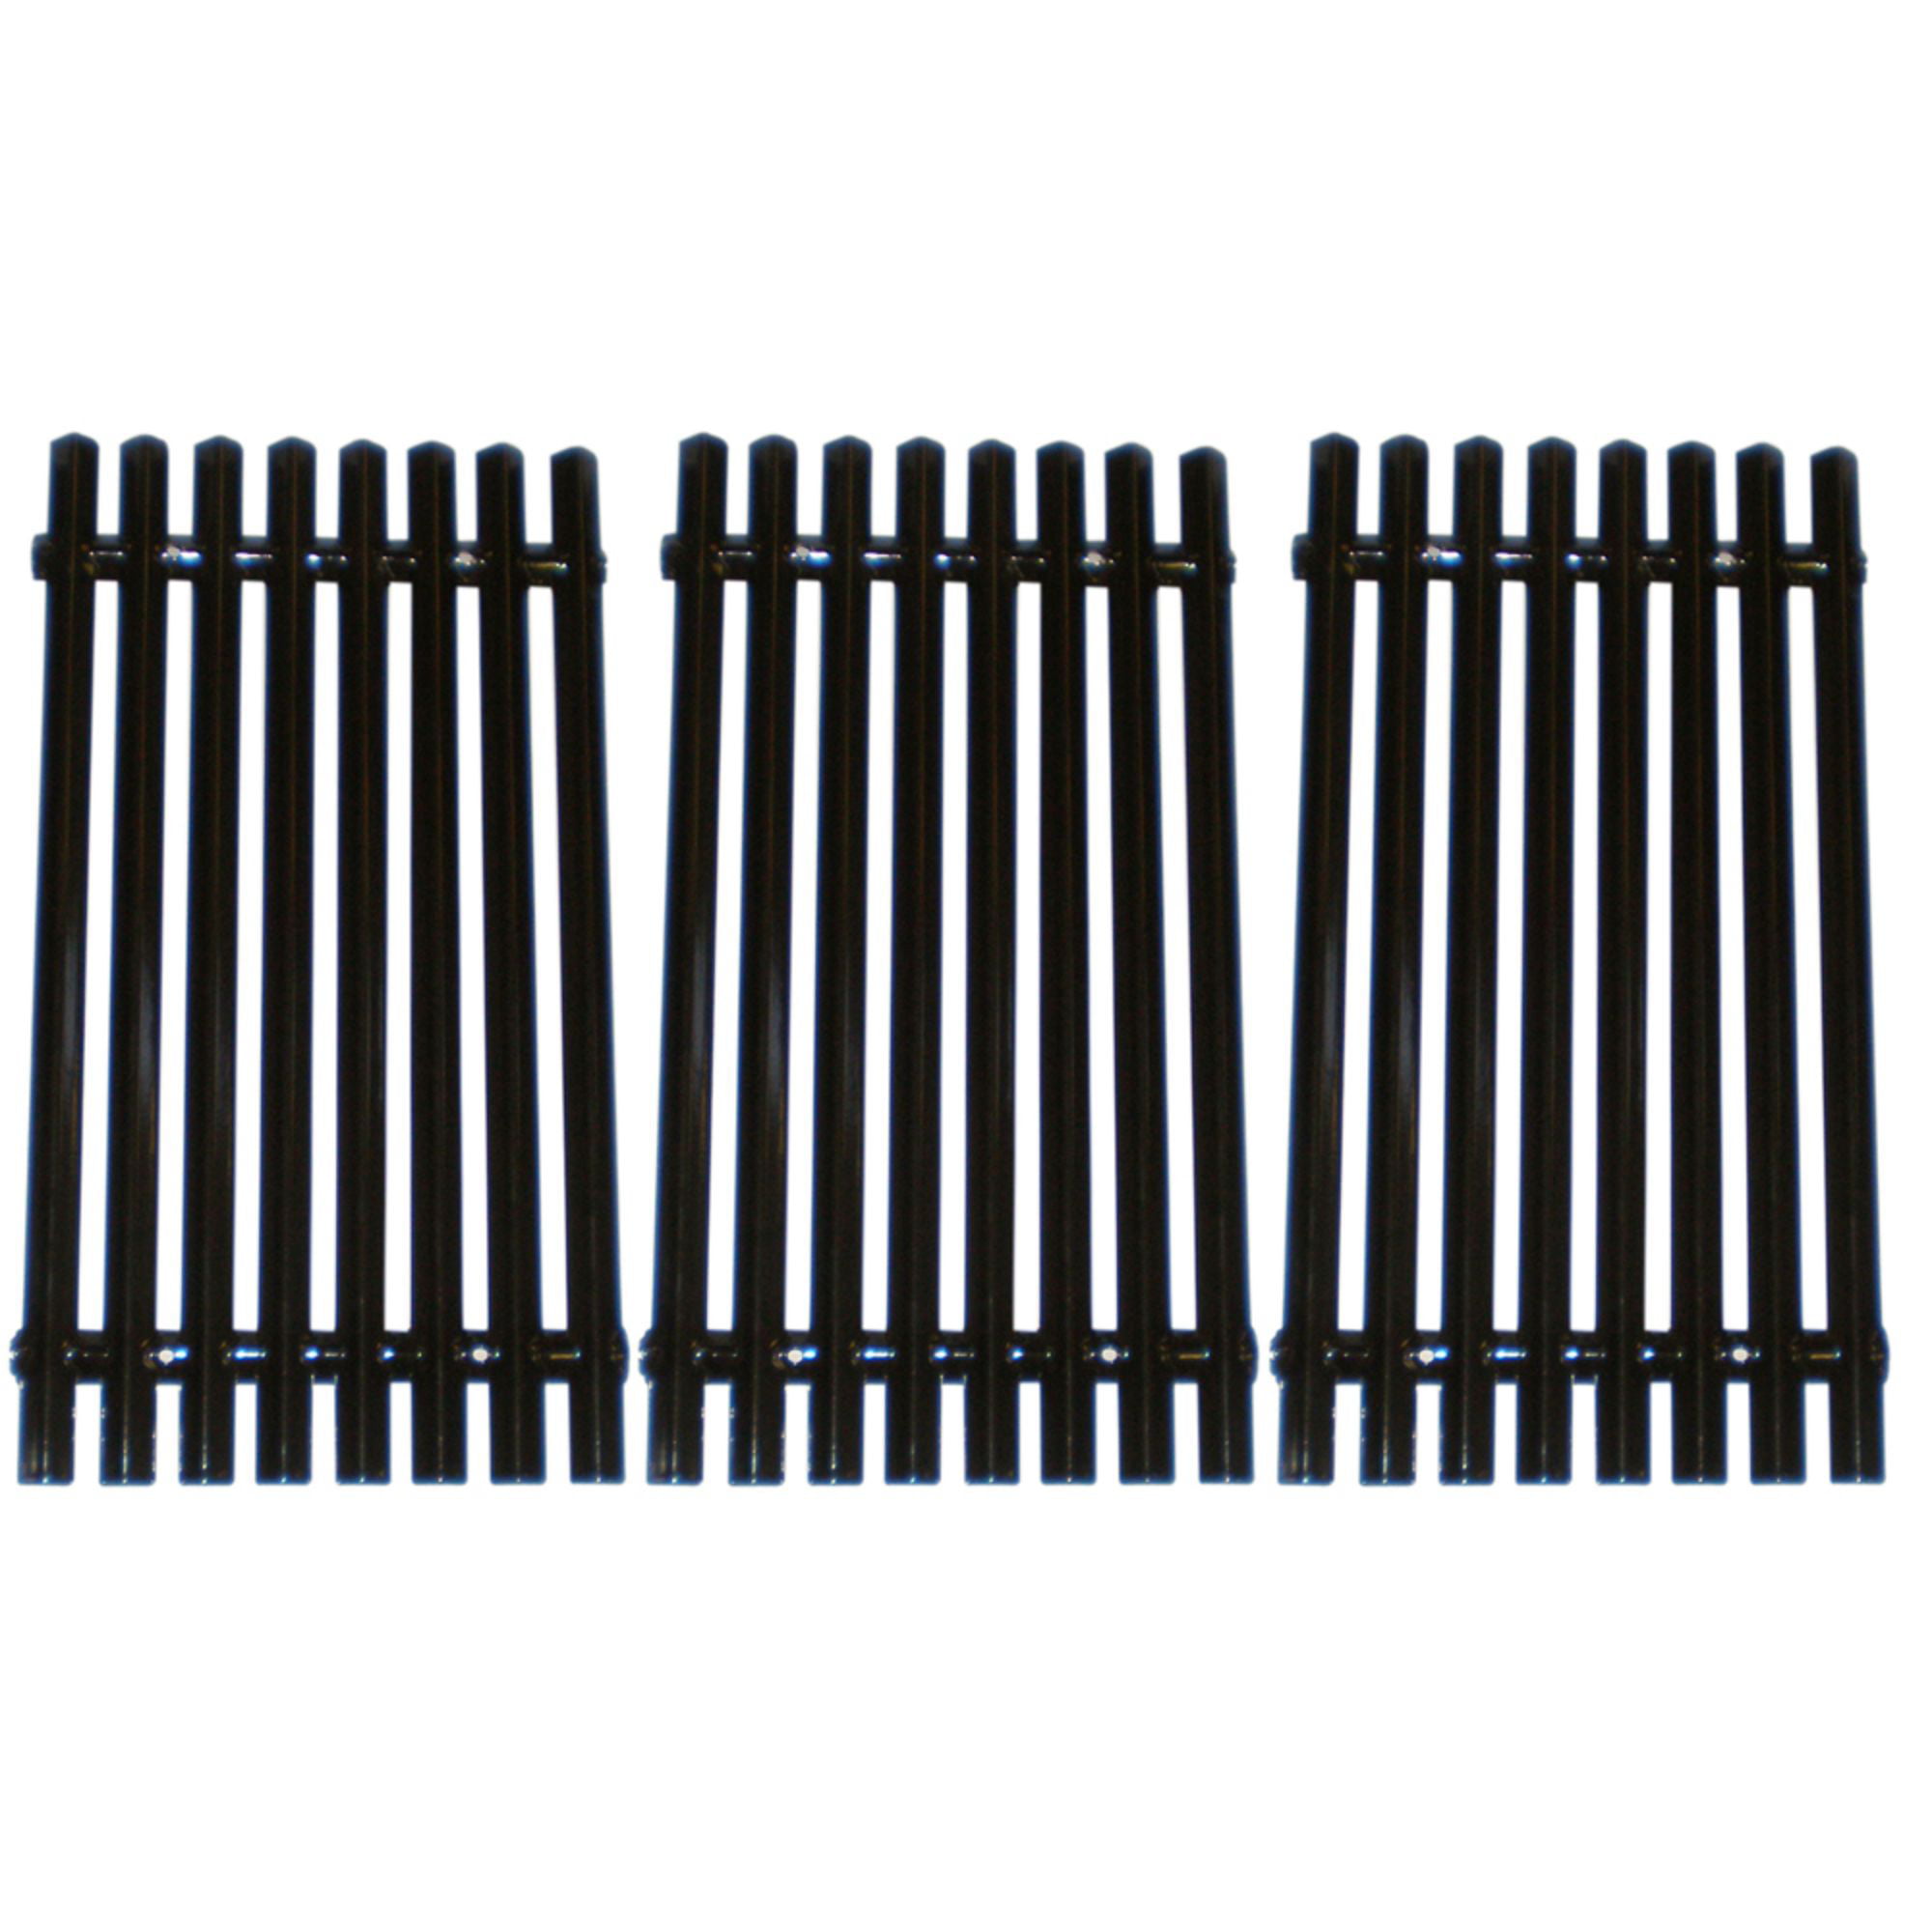 Porcelain steel channels cooking grid for Charbroil, Kenmore, Master Chef, Outdoor Gourmet, Shinerich brand gas grills